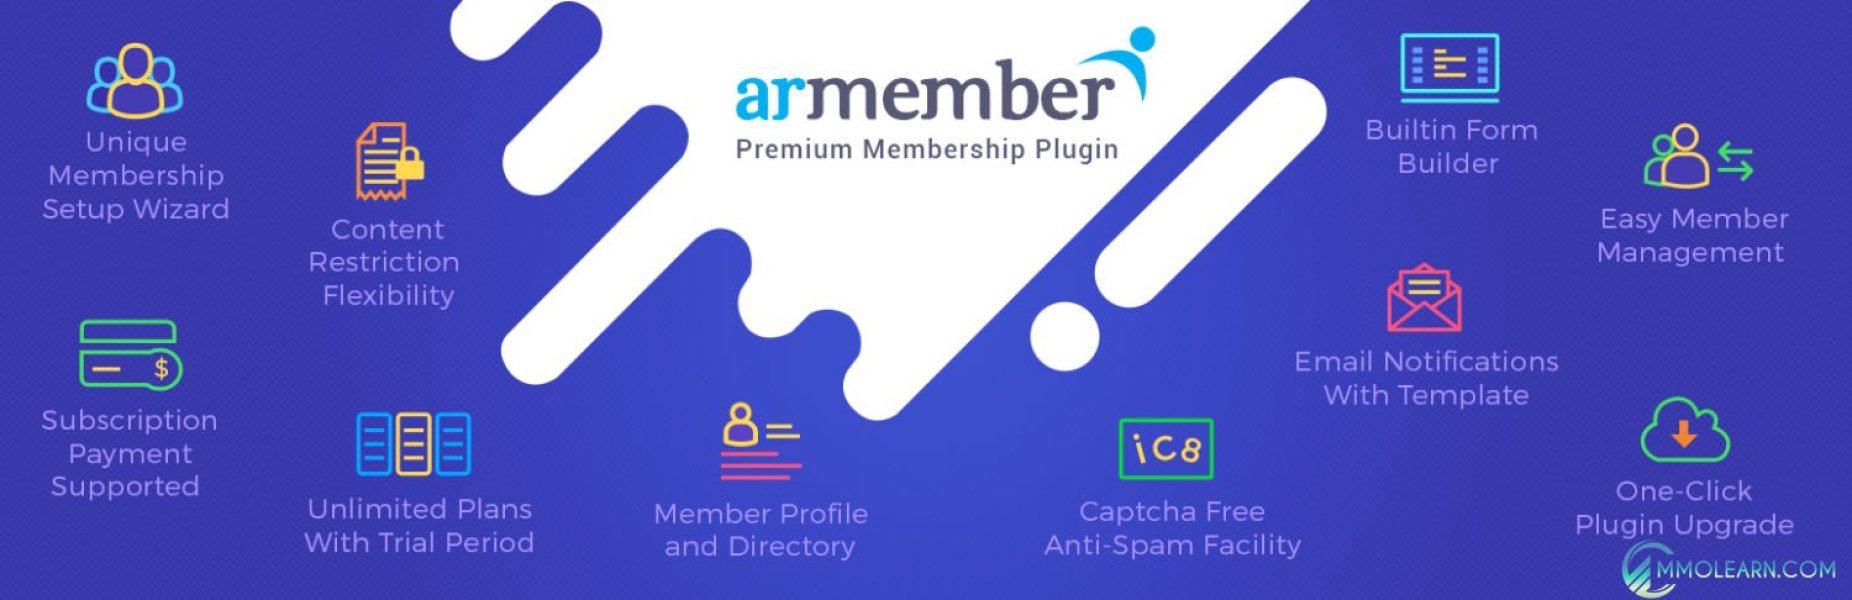 PayPalPro Payment Gateway Addon For ARMember